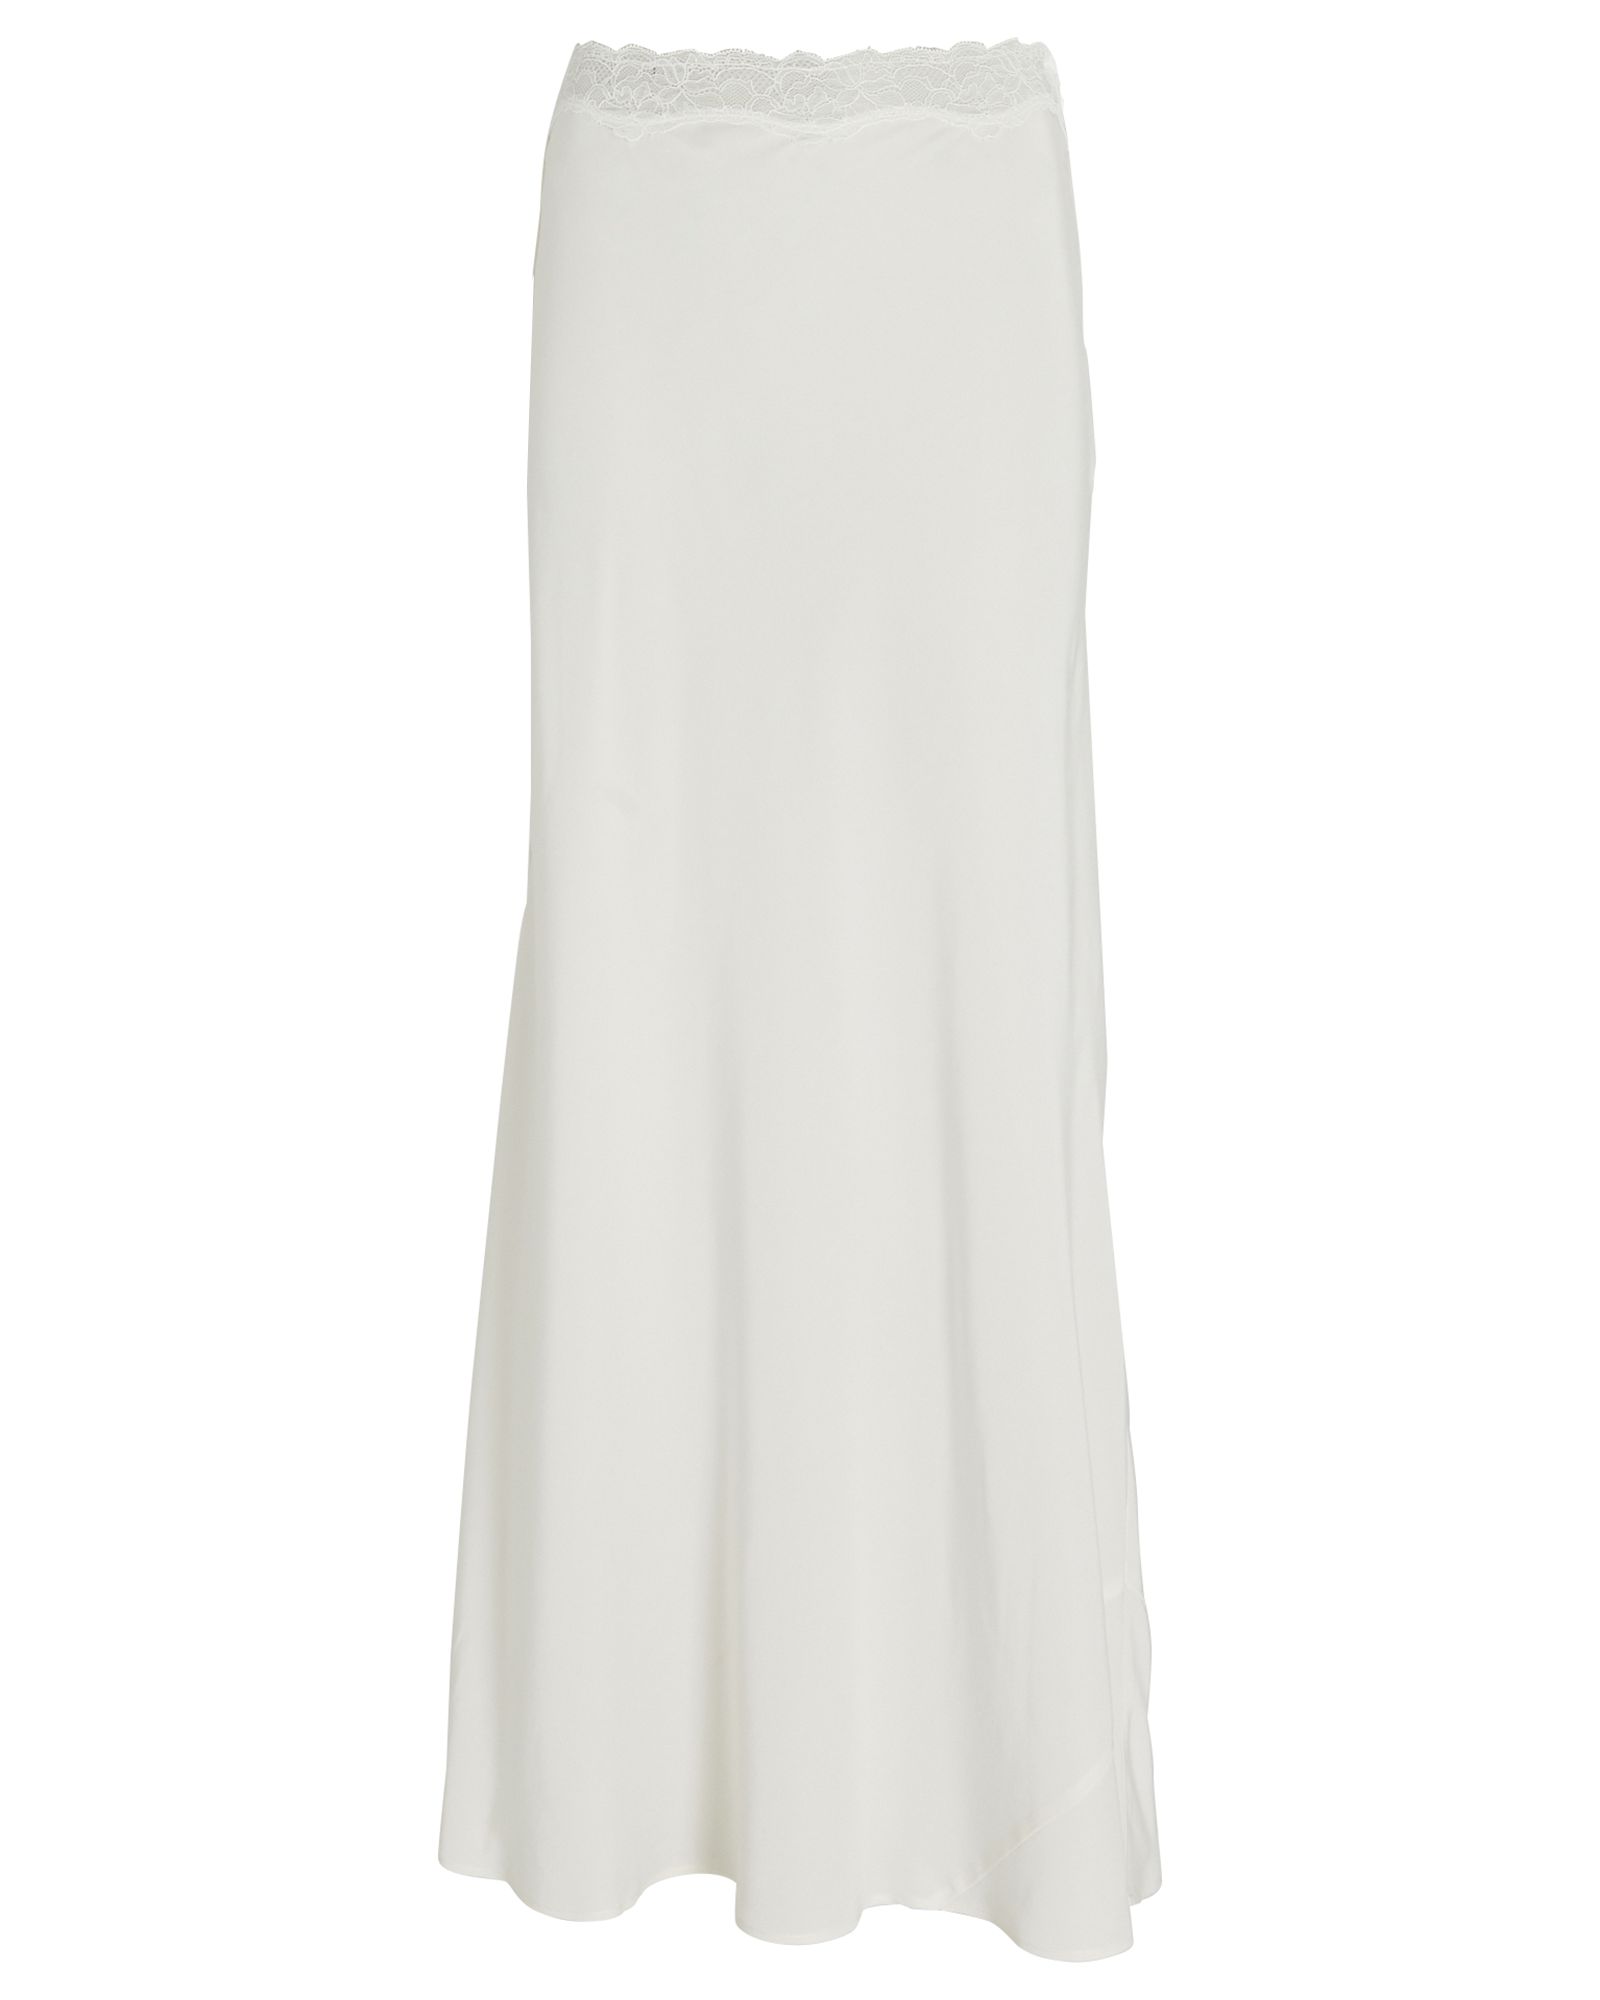 SIR the label Alma Lace-Trimmed Silk Skirt | INTERMIX®